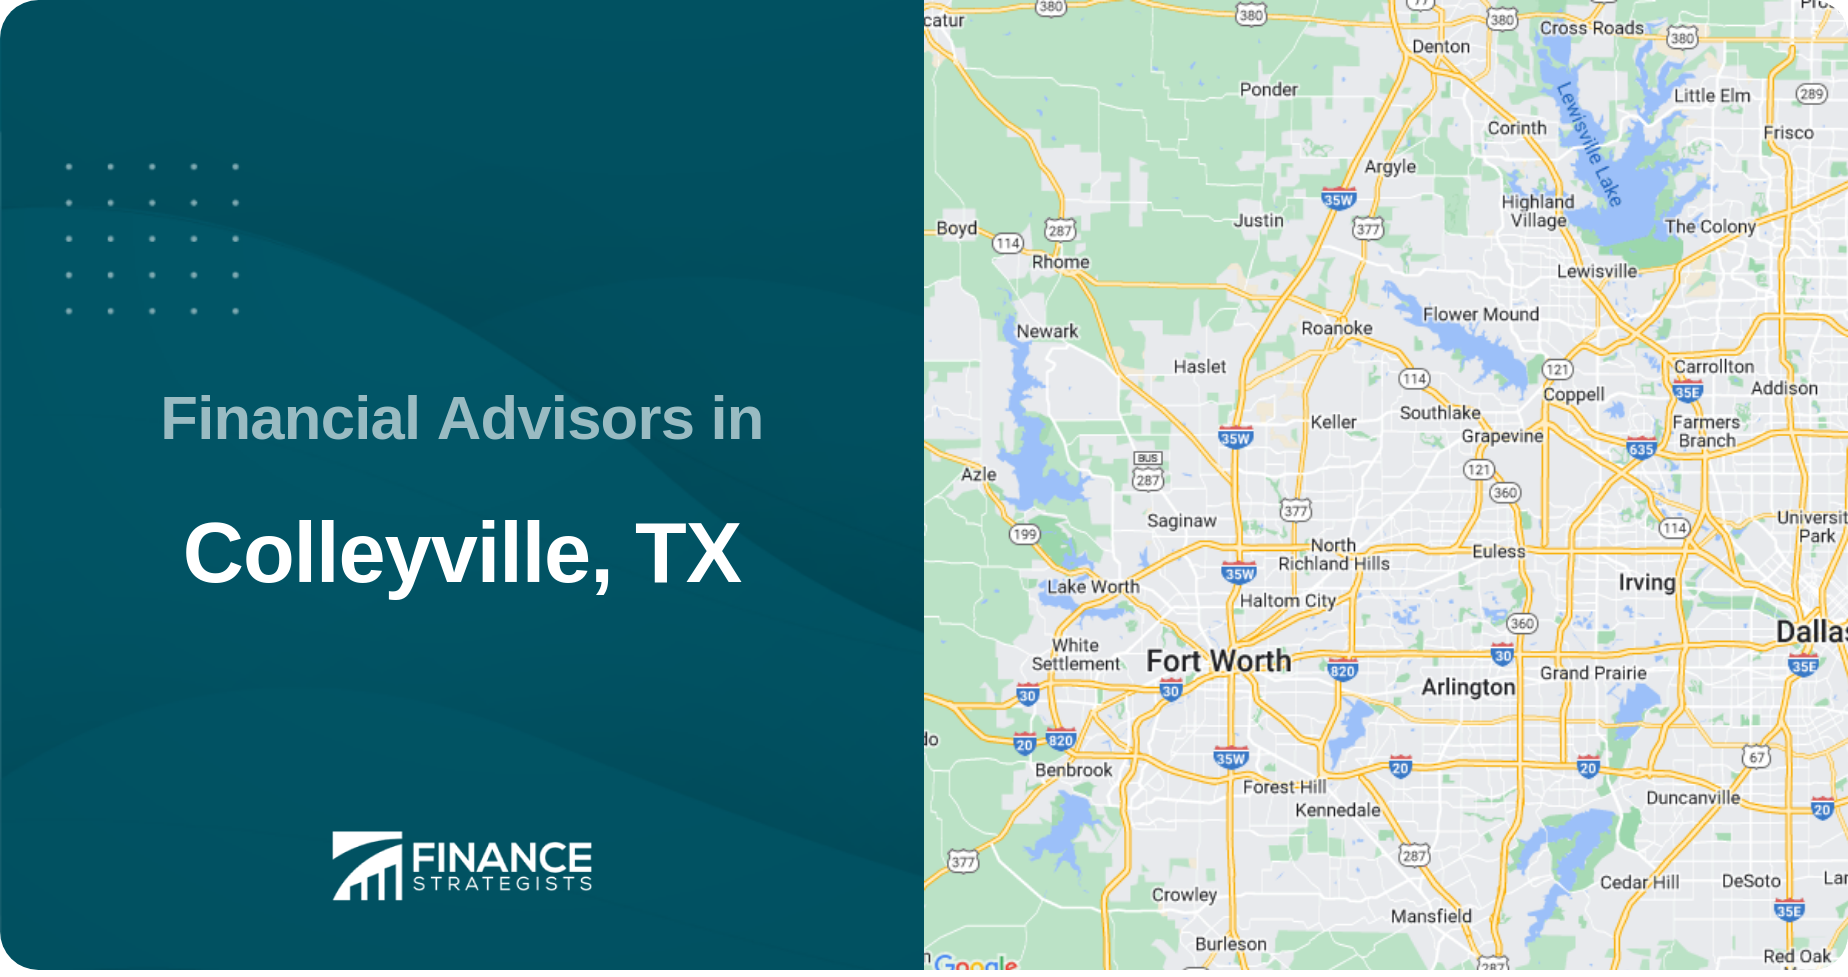 Financial Advisors in Colleyville, TX